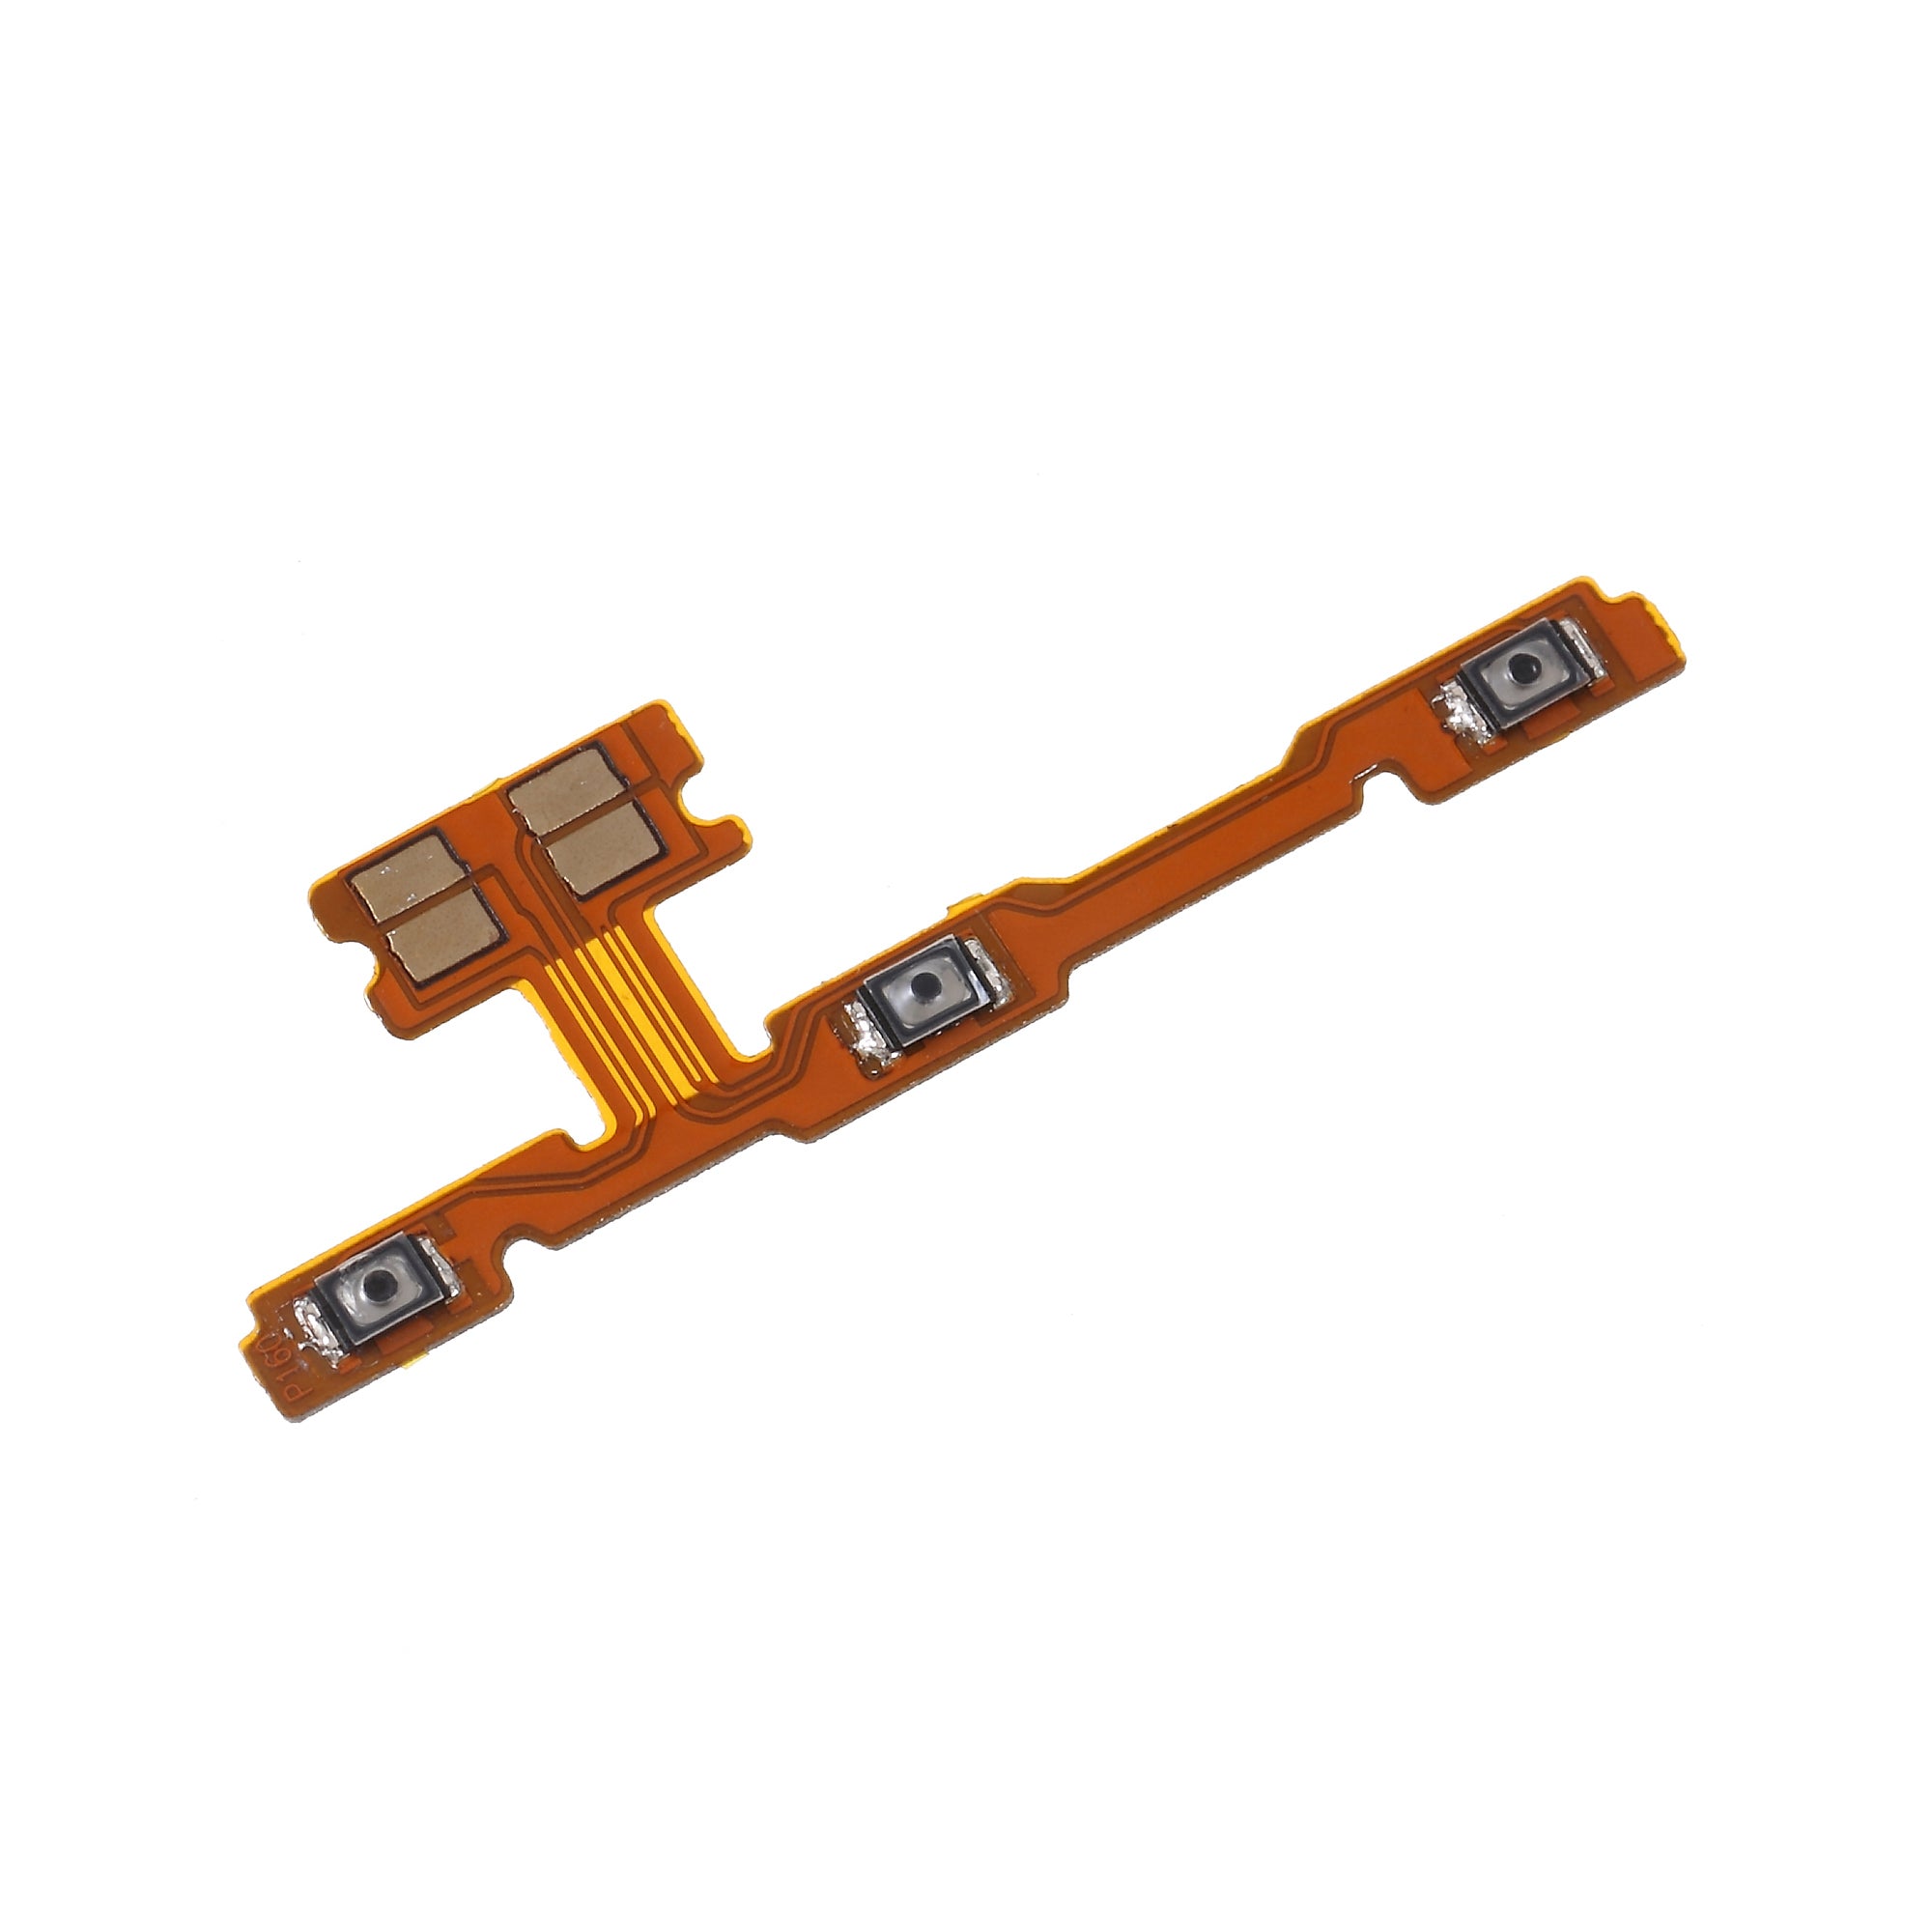 OEM Power On/Off and Volume Buttons Flex Cable for Huawei P Smart (2017) / Enjoy 7S